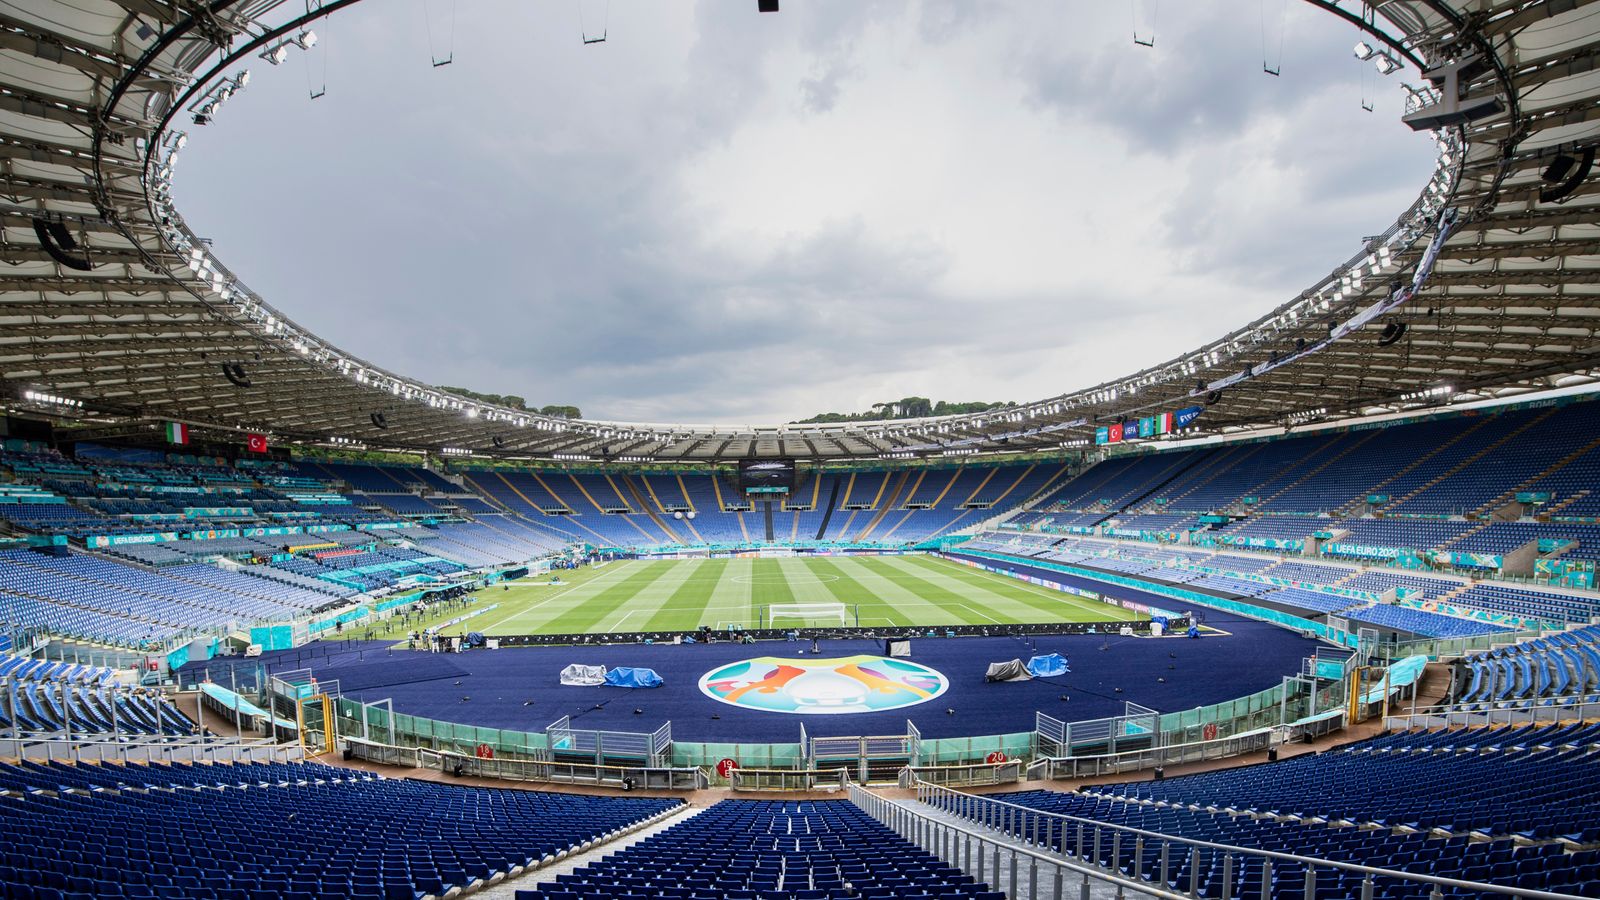 England fans travelling to Rome for Euro 2020 quarter-final vs Ukraine will not be allowed in stadium, Italian embassy warns